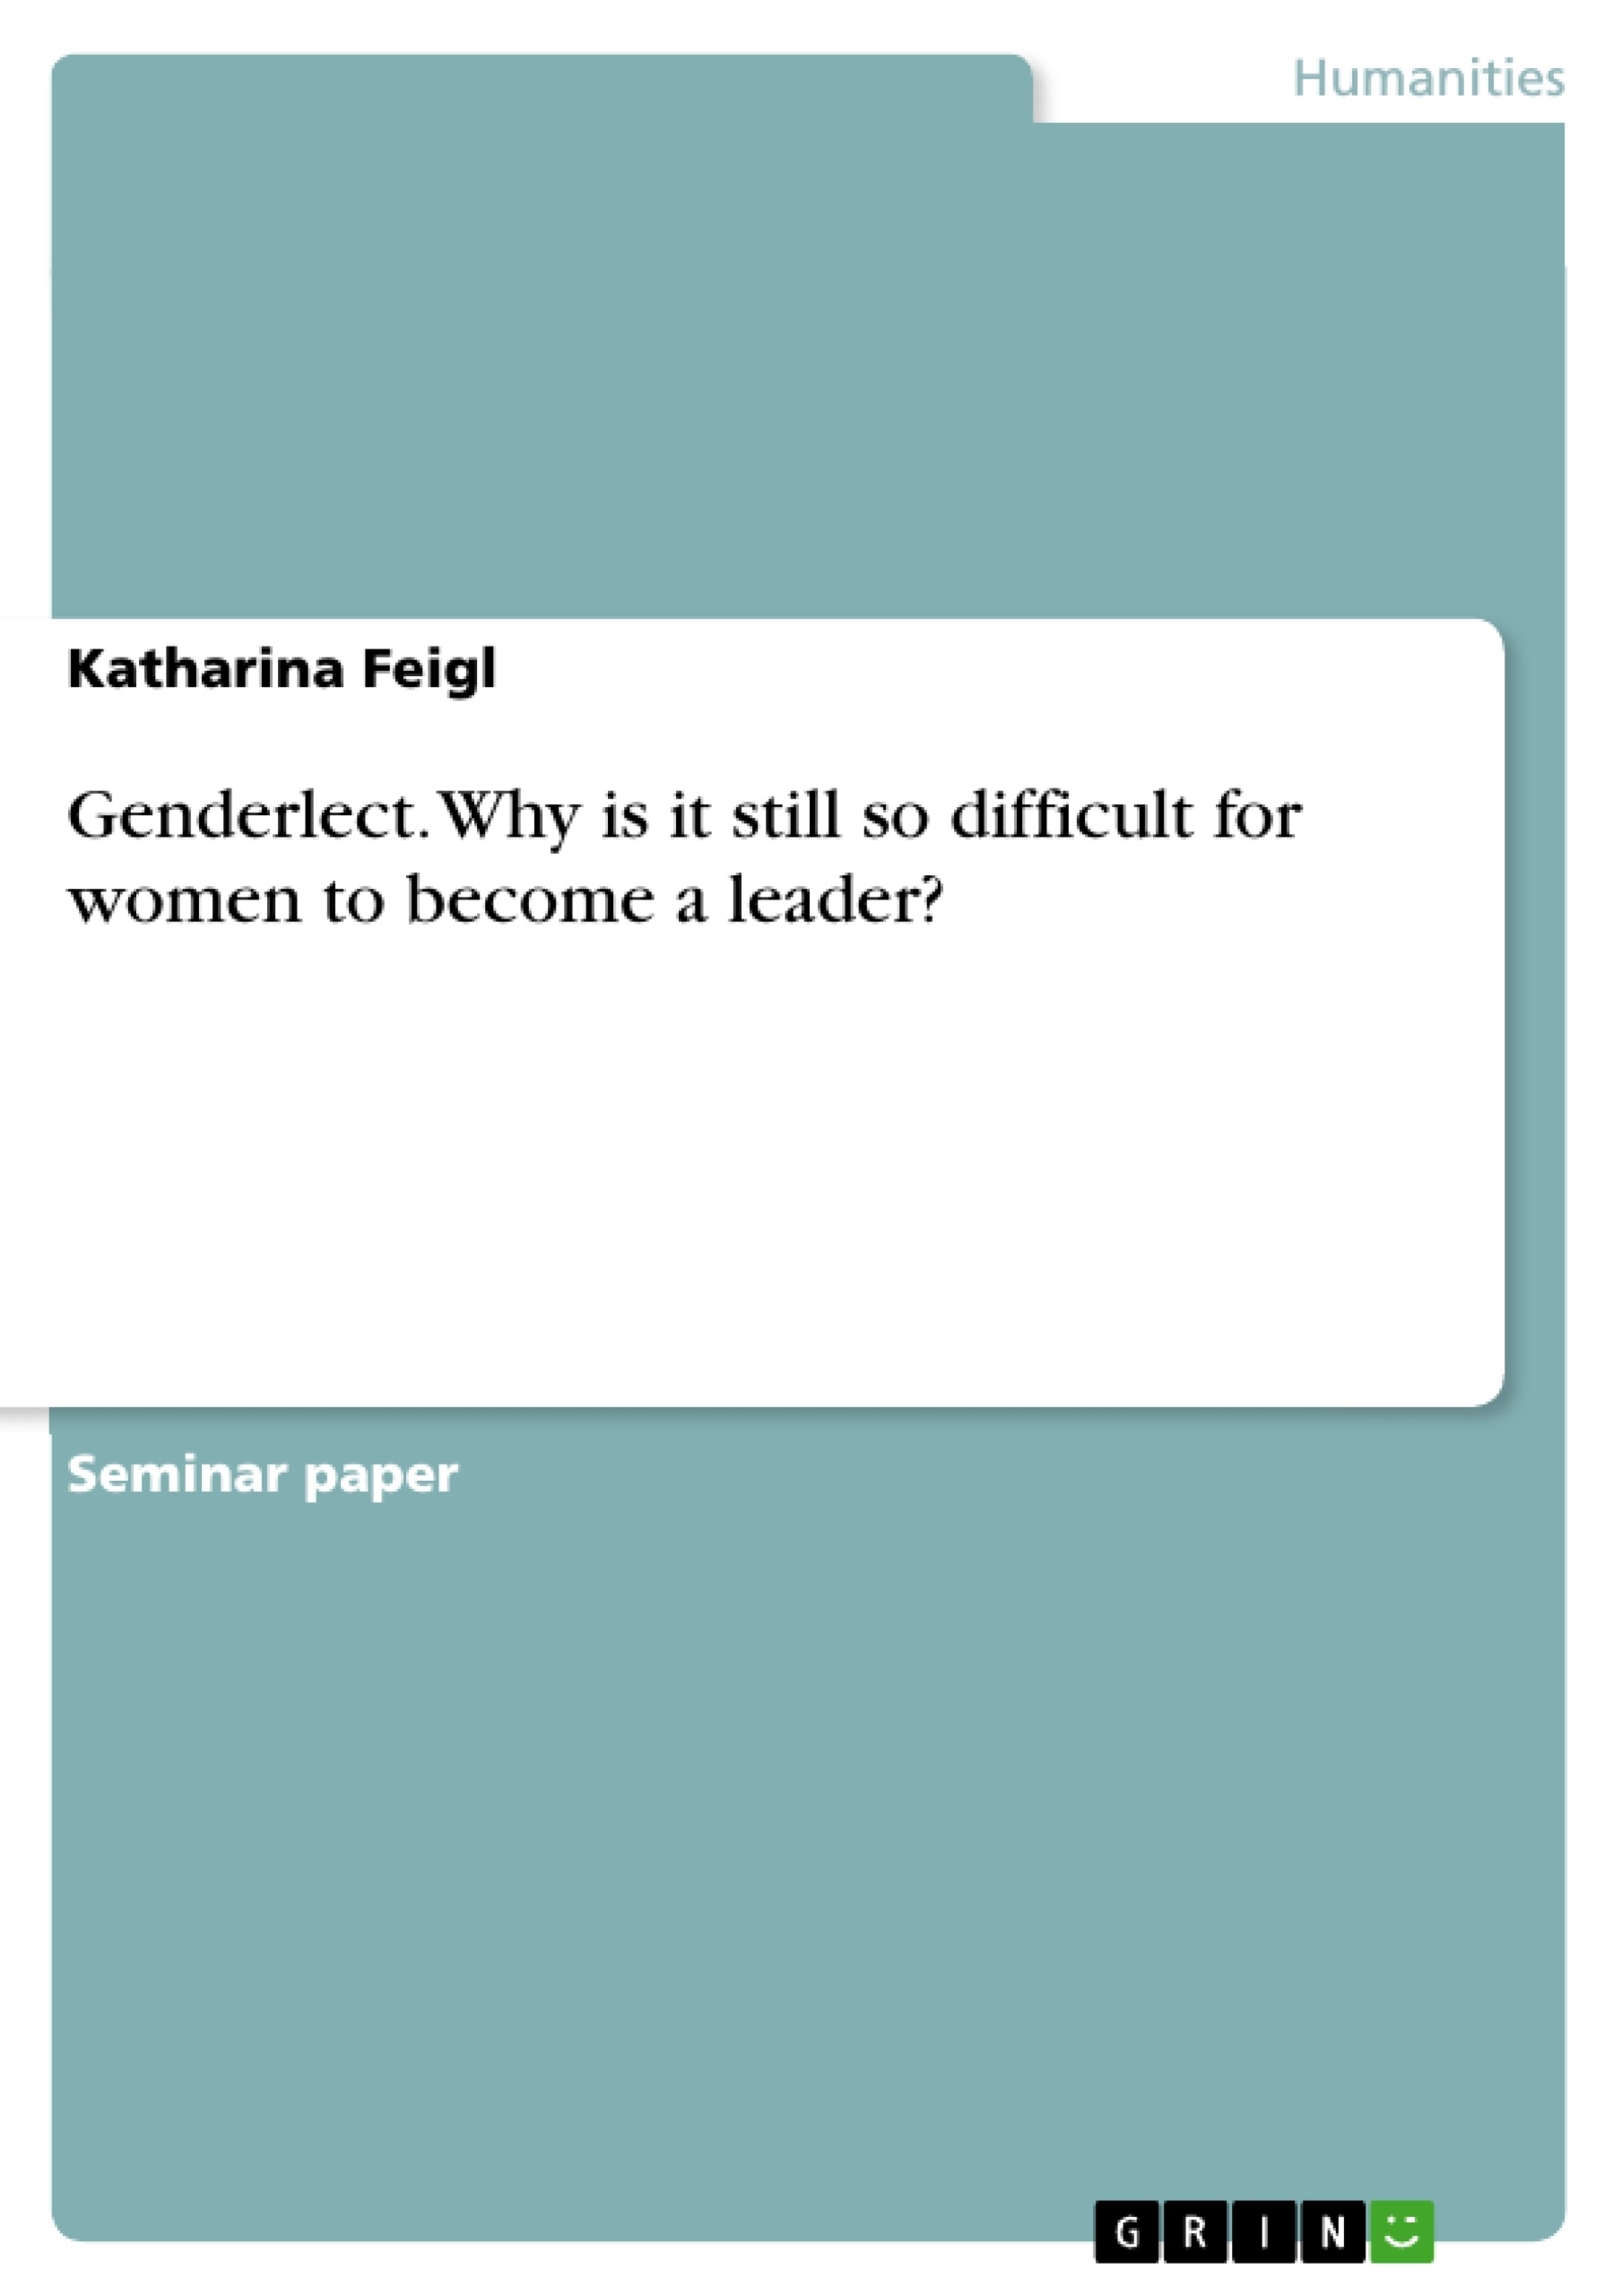 Title: Genderlect. Why is it still so difficult for women to become a leader?